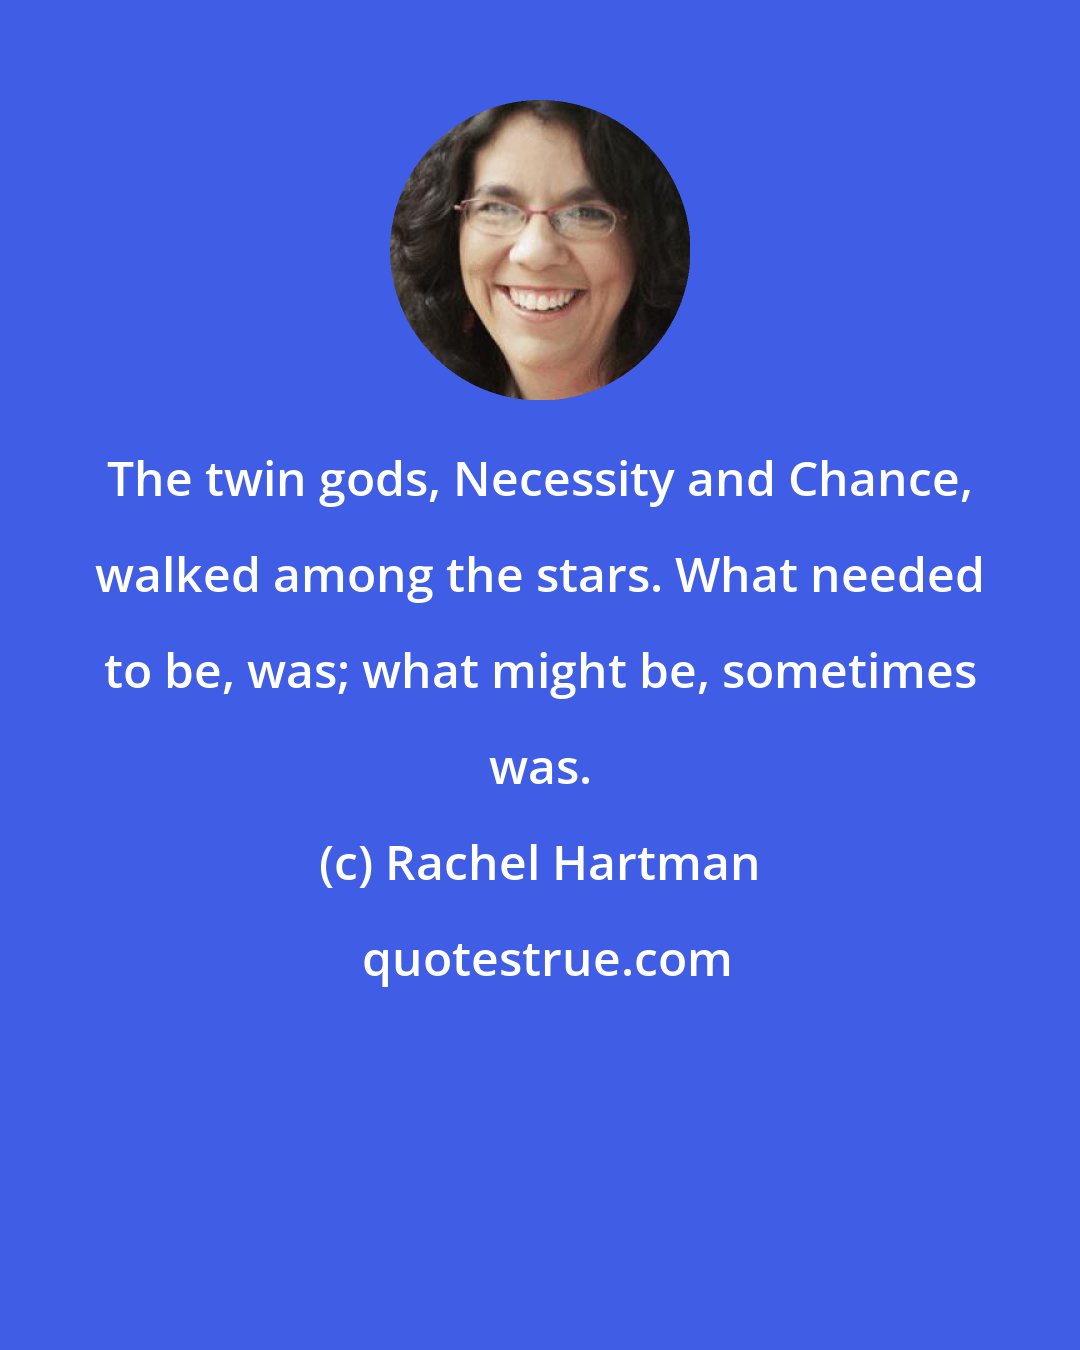 Rachel Hartman: The twin gods, Necessity and Chance, walked among the stars. What needed to be, was; what might be, sometimes was.